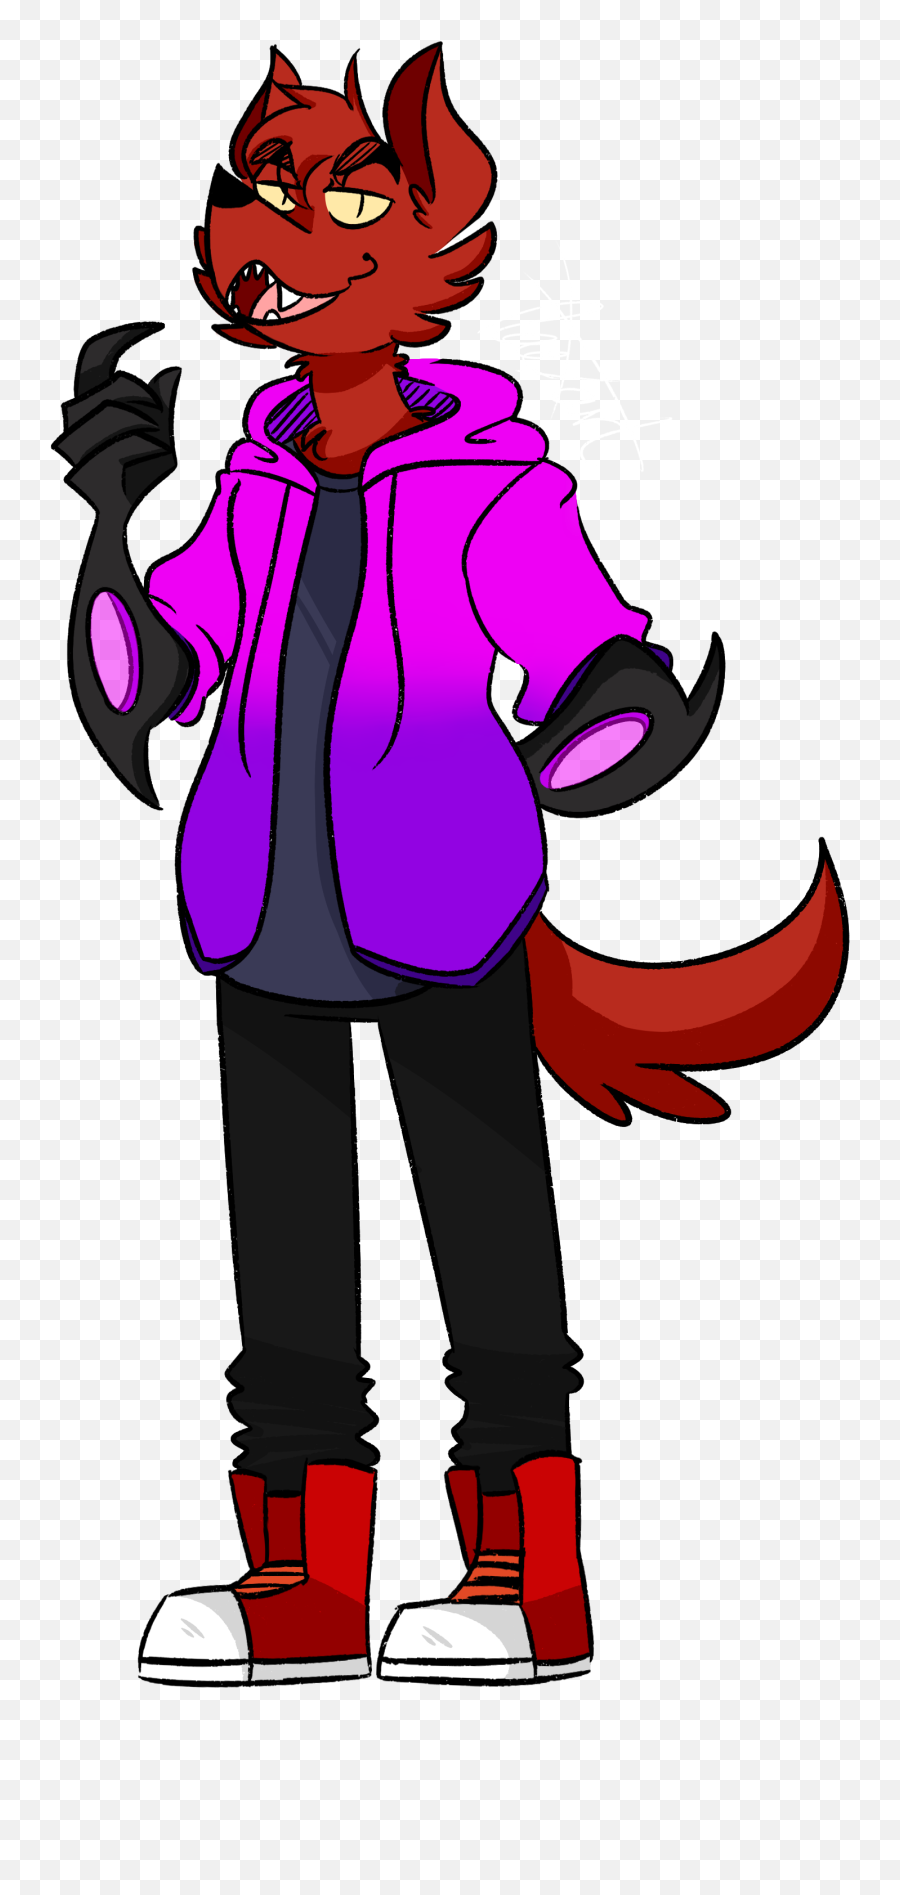 Download Fan Artpyro Liked This On Twitter Iu0027m Going To Cry Emoji,Pyrocynical Transparent